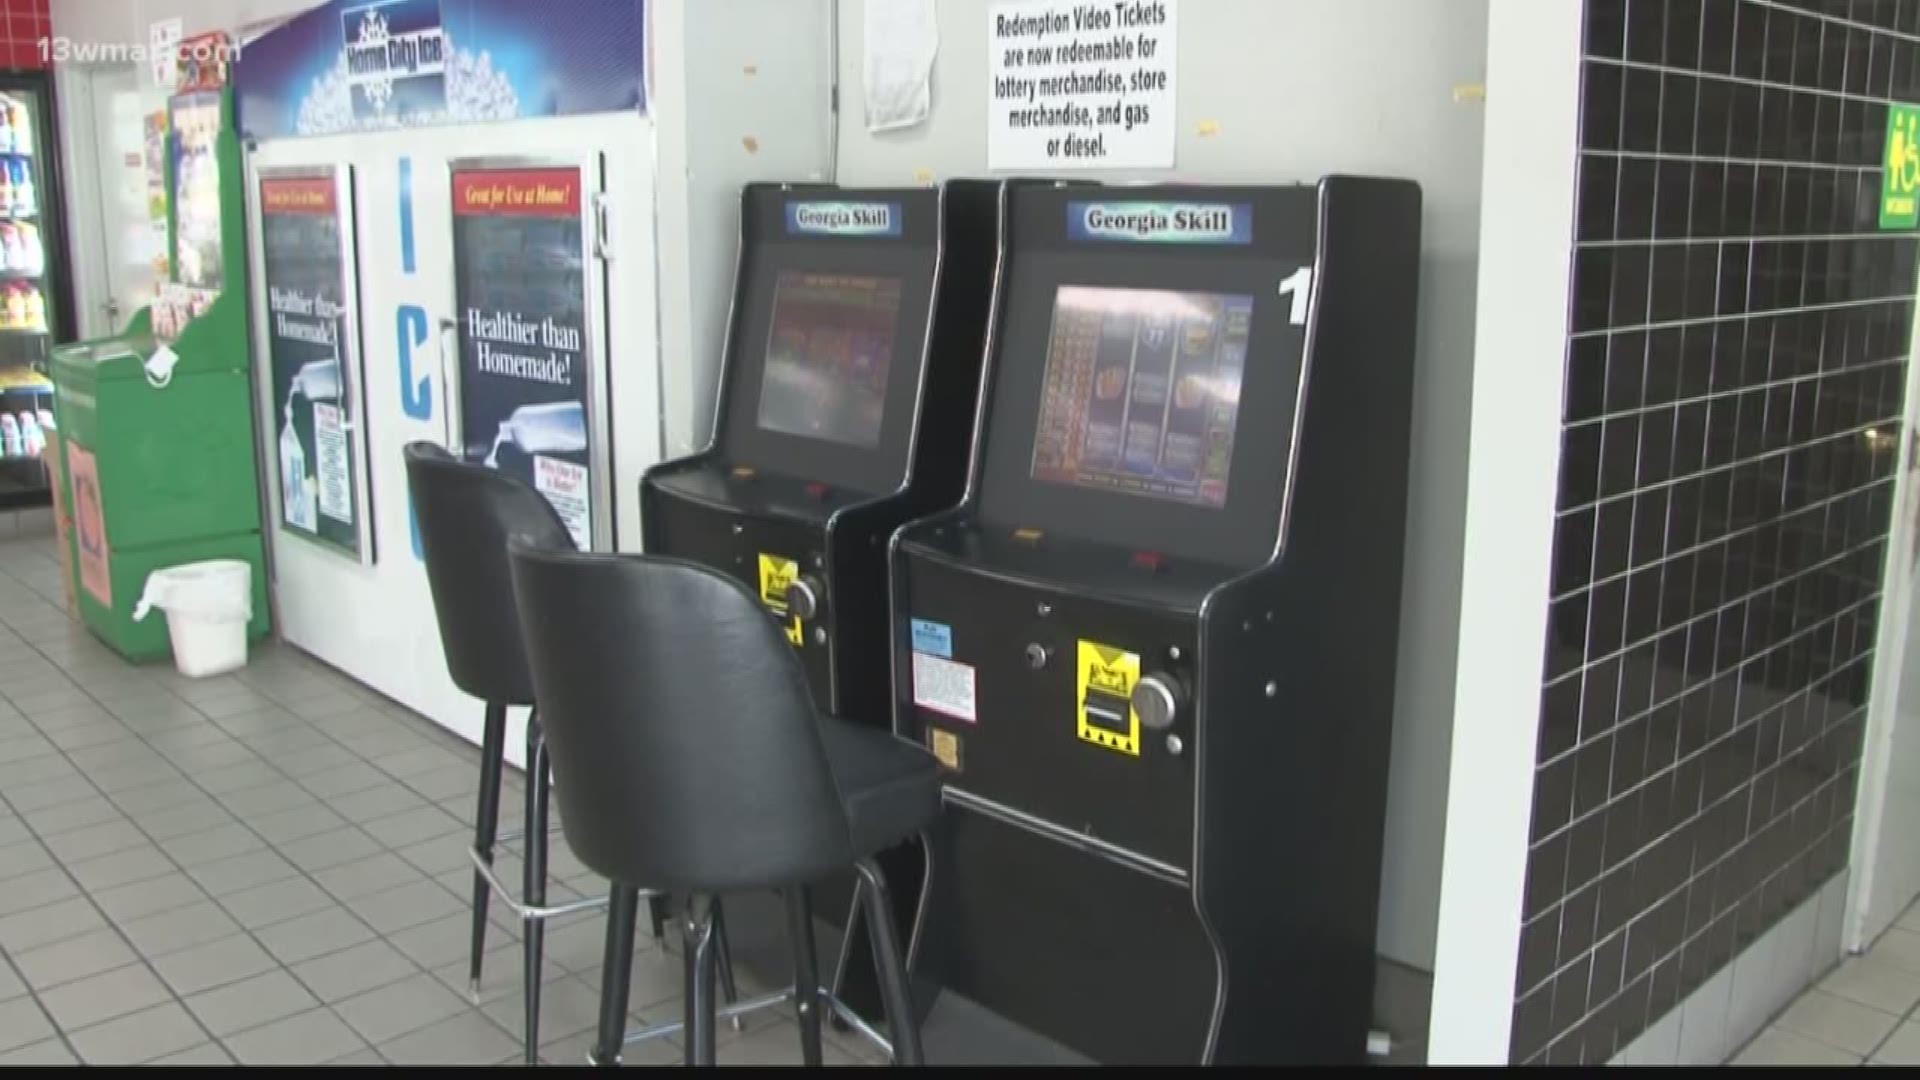 Bibb District Attorney David Cooke is still calling on state legislators to ban coin-operated amusement machines often found in convenience stores. Cooke blames the machines for feeding gambling addictions, targeting low-income communities, and causing more violent crime.